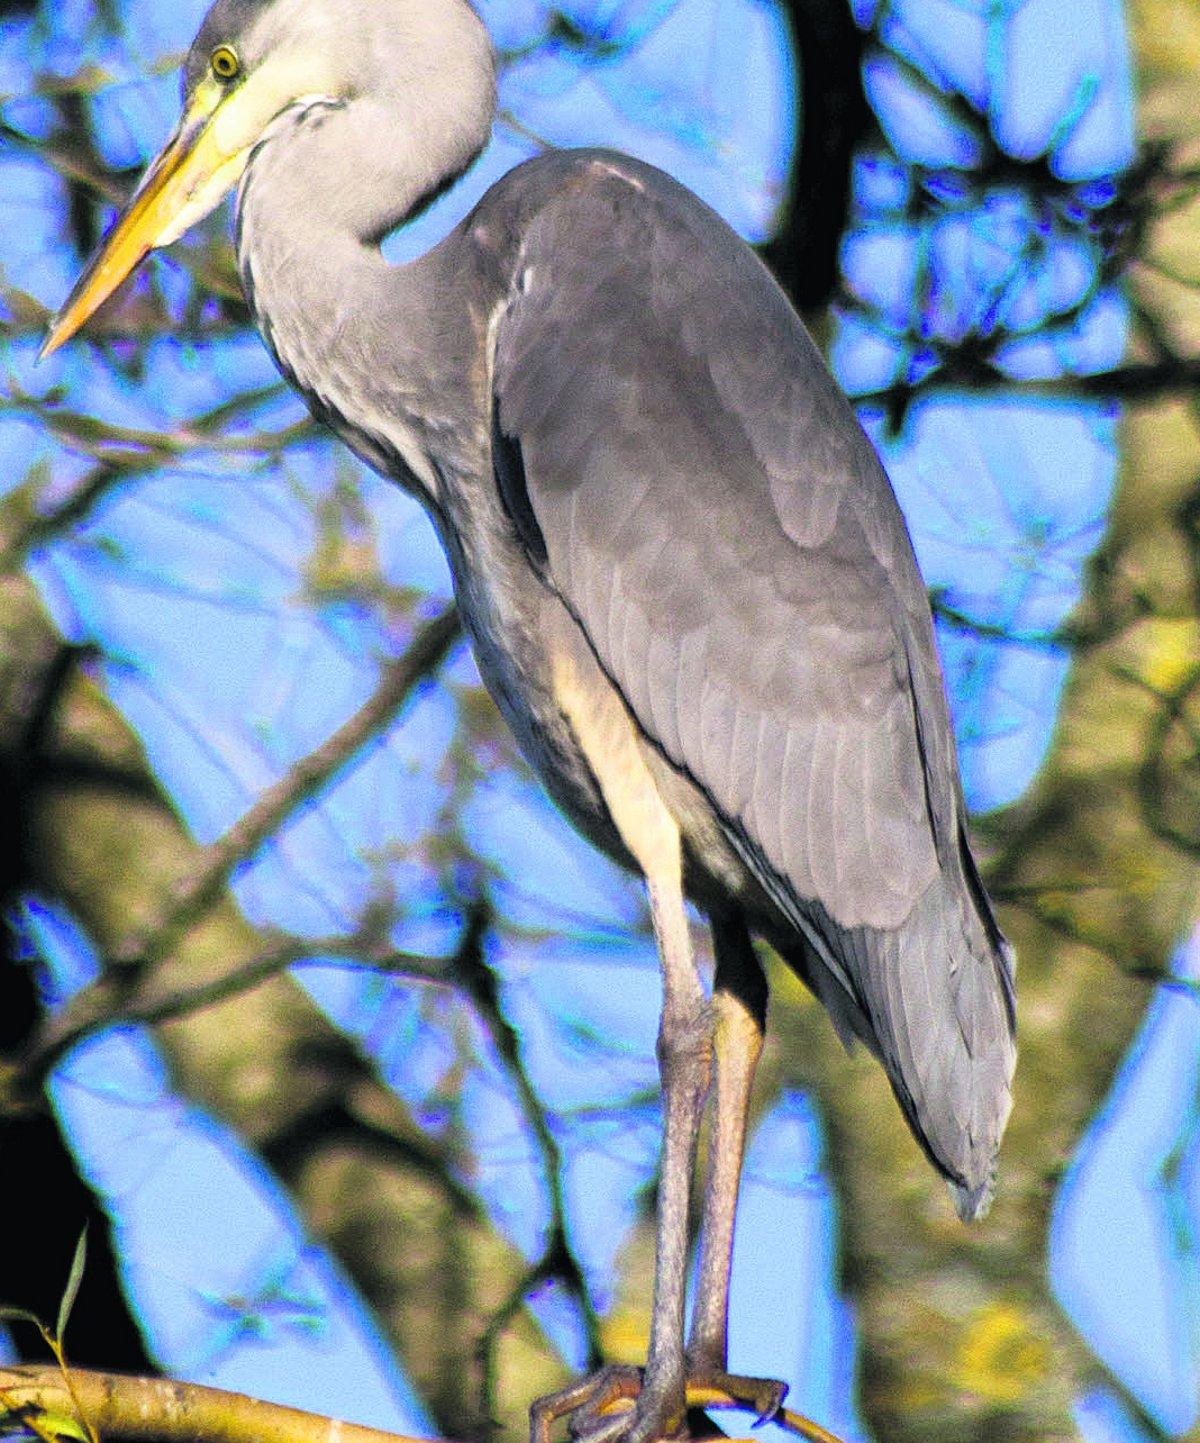 Swiindon Advertiser readers photographs
A heron in Lawns
Picture: John Harding